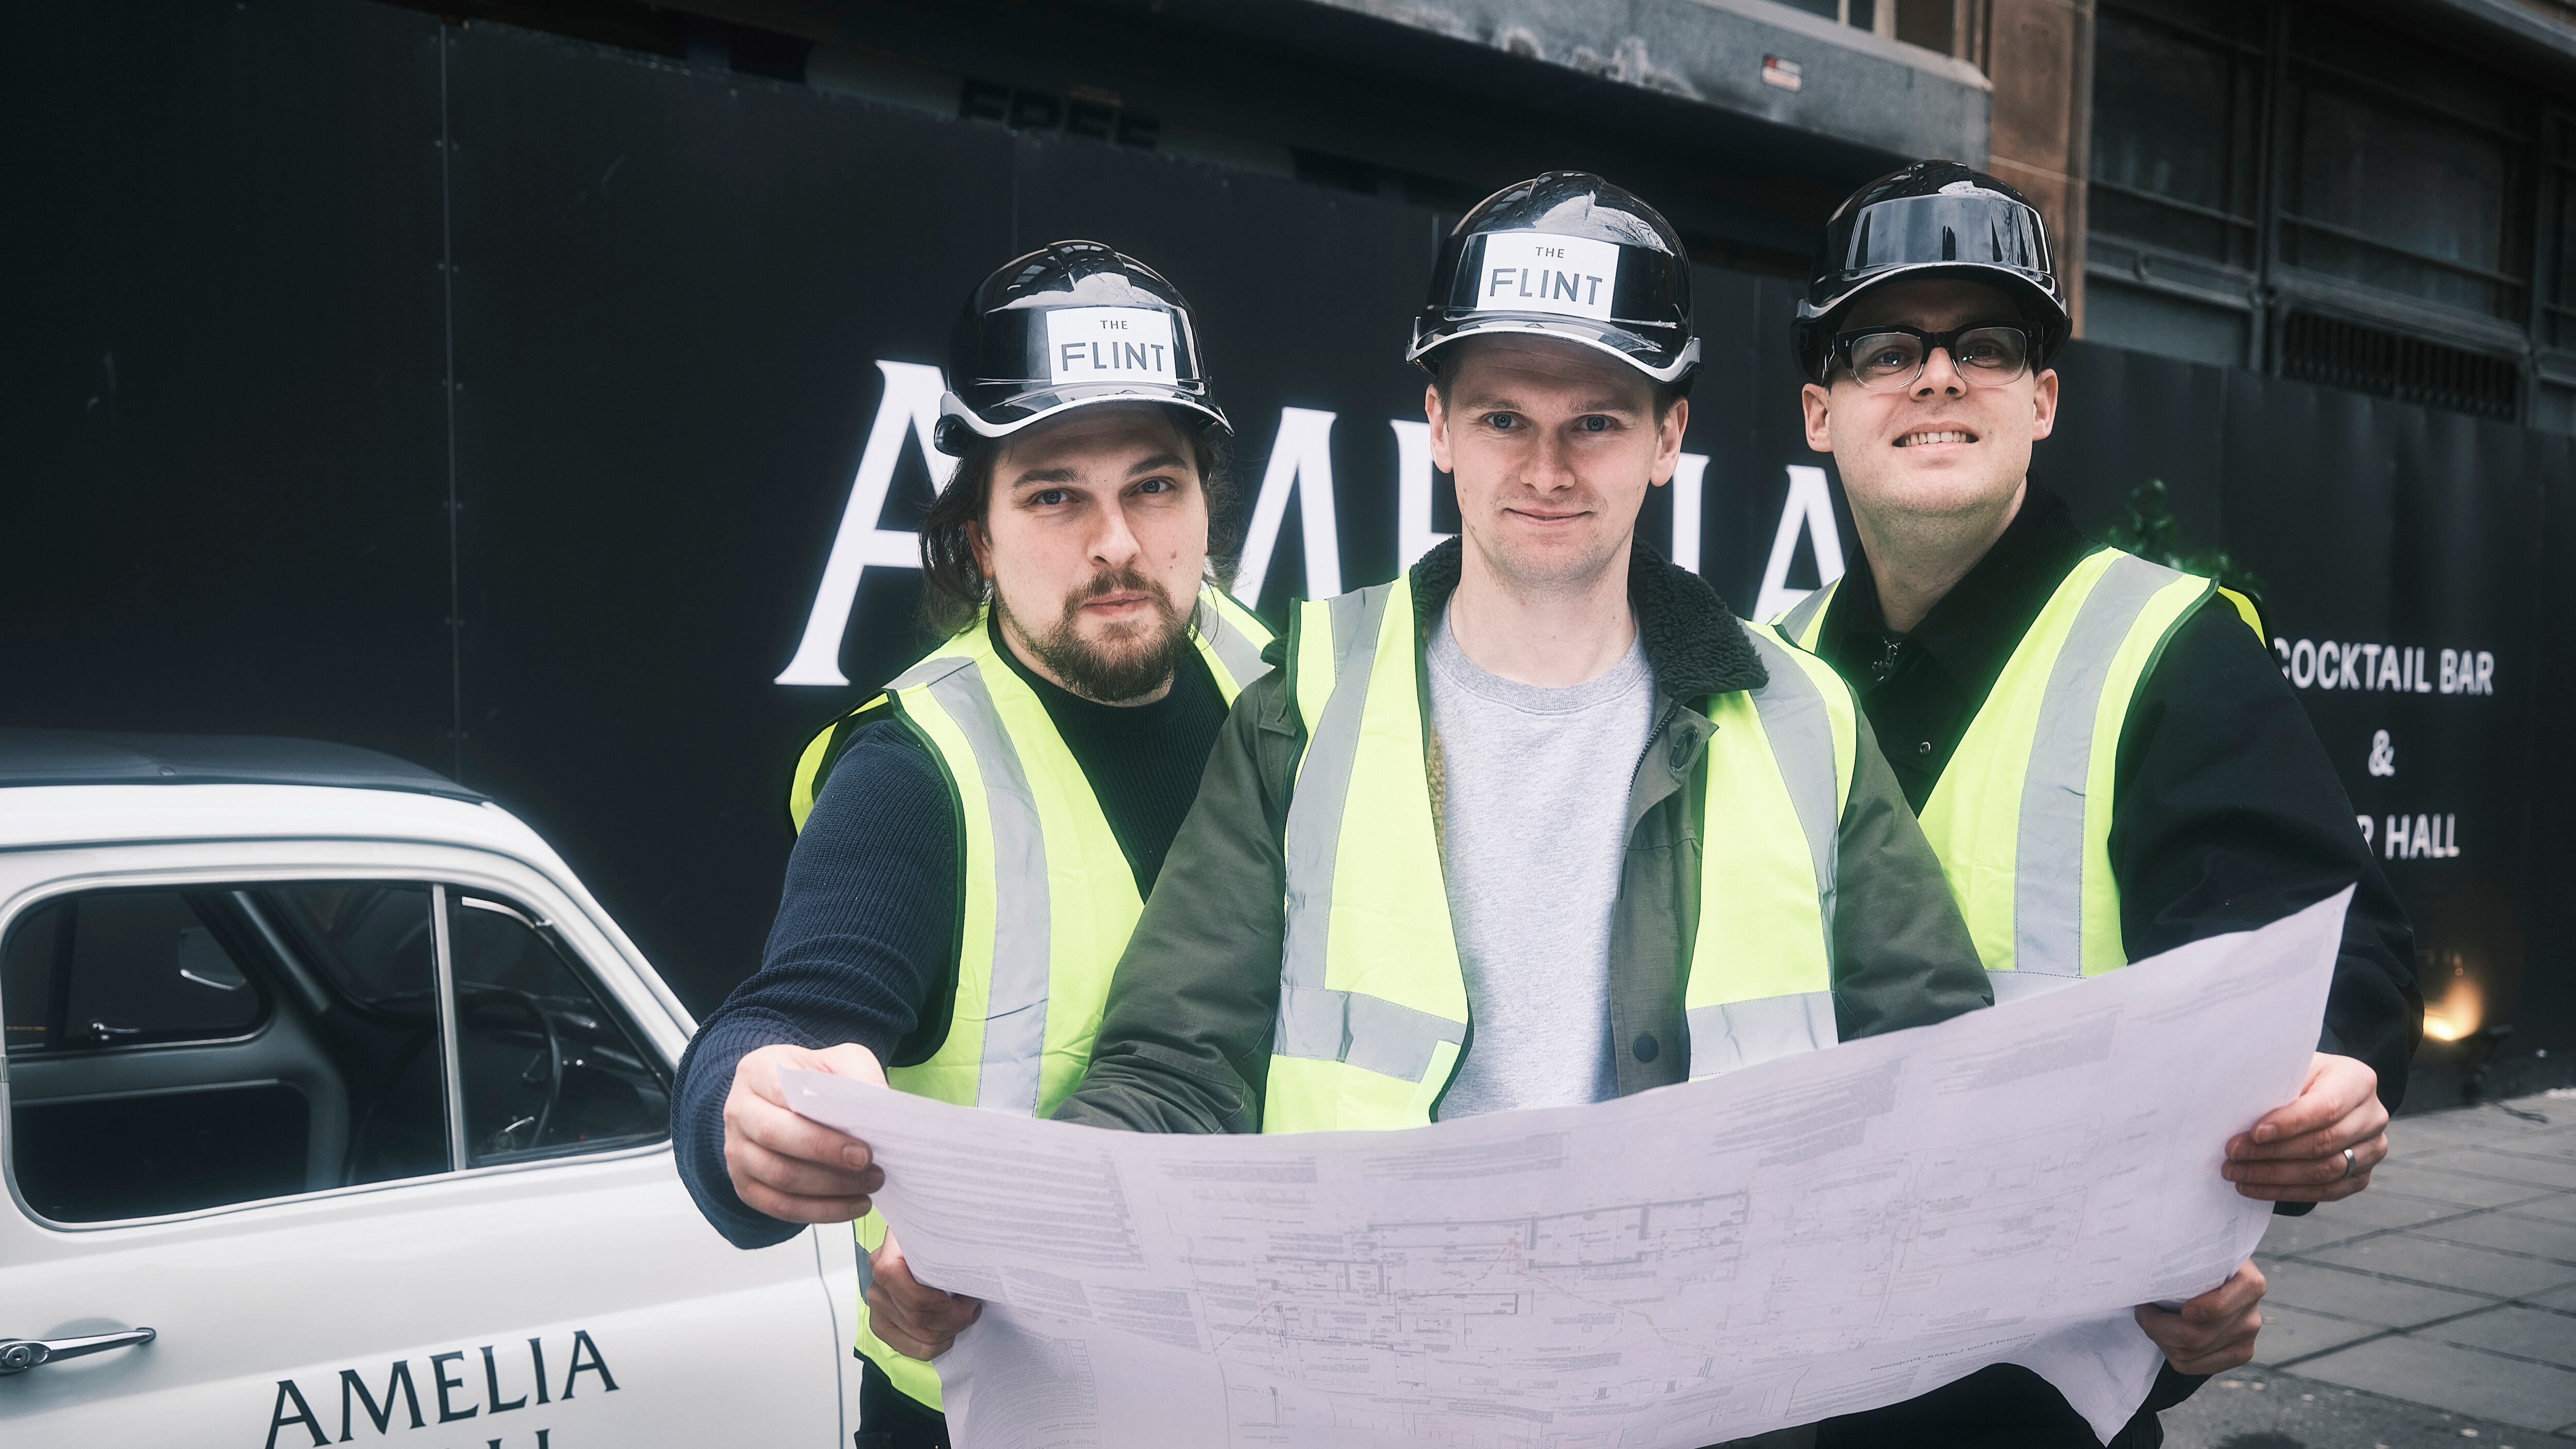 L-R: Ben Ringland, Peter Ringland and Thomas Camblin examine the plans for their new Amelia Hall hospitality project in Belfast city centre.